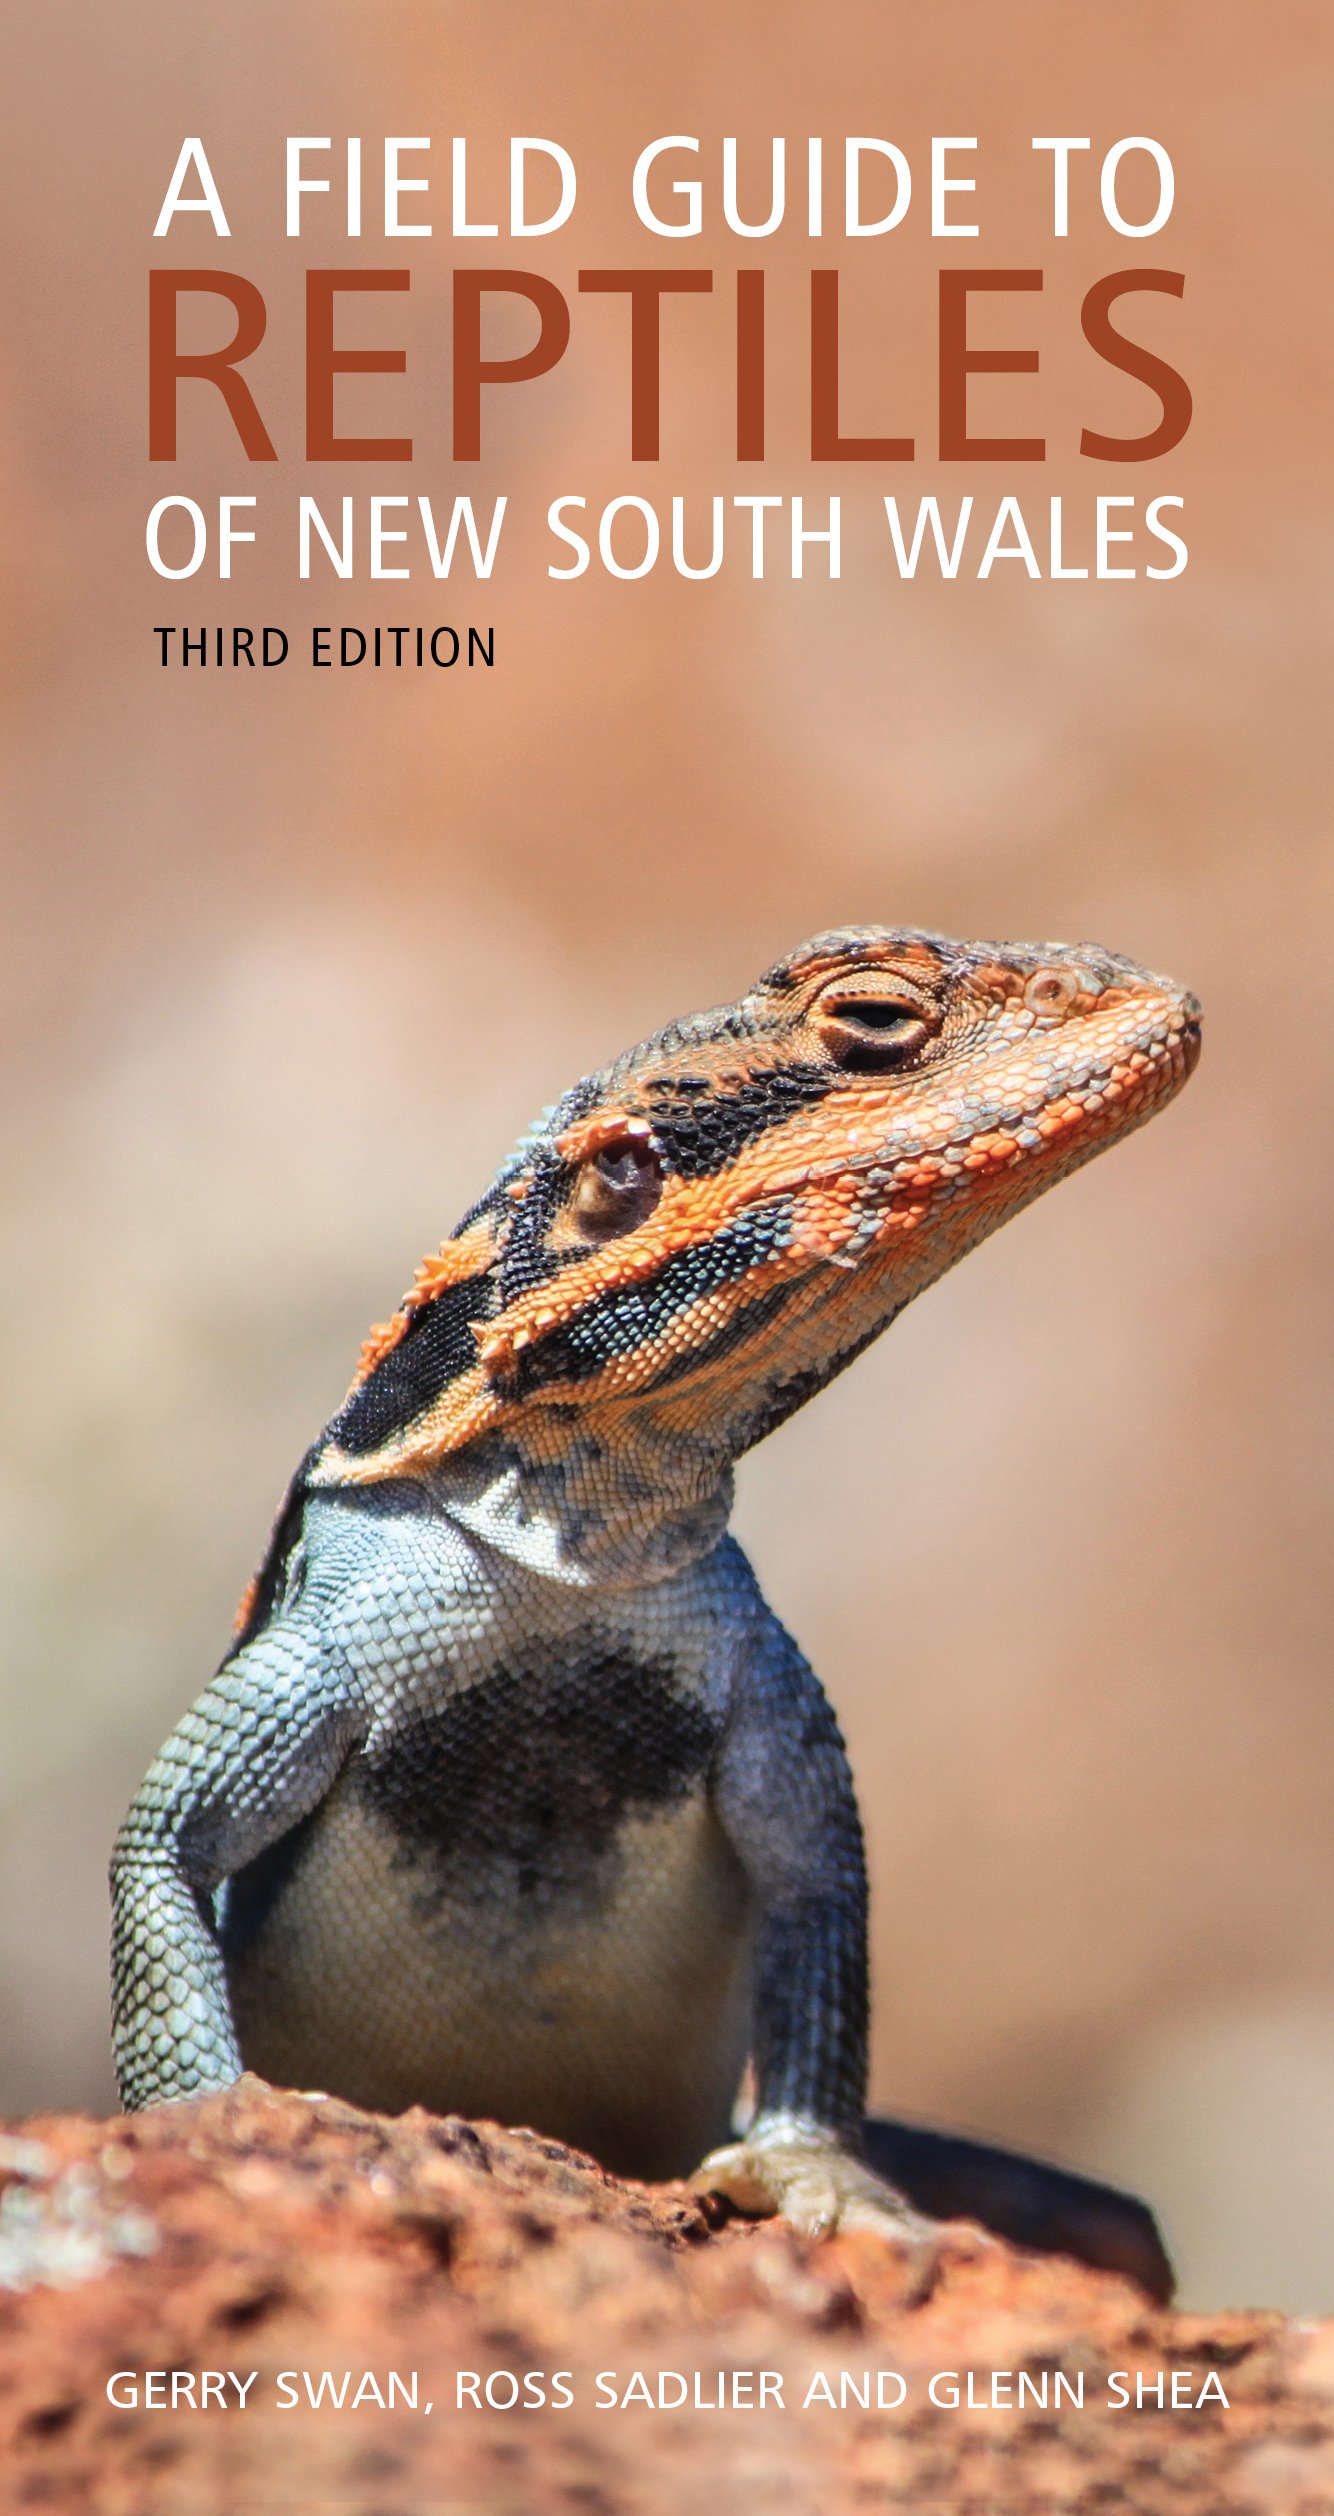 A Field Guide to Reptiles of New South Wales, Ross Sadlier, Gerry Swan and Glenn Shea